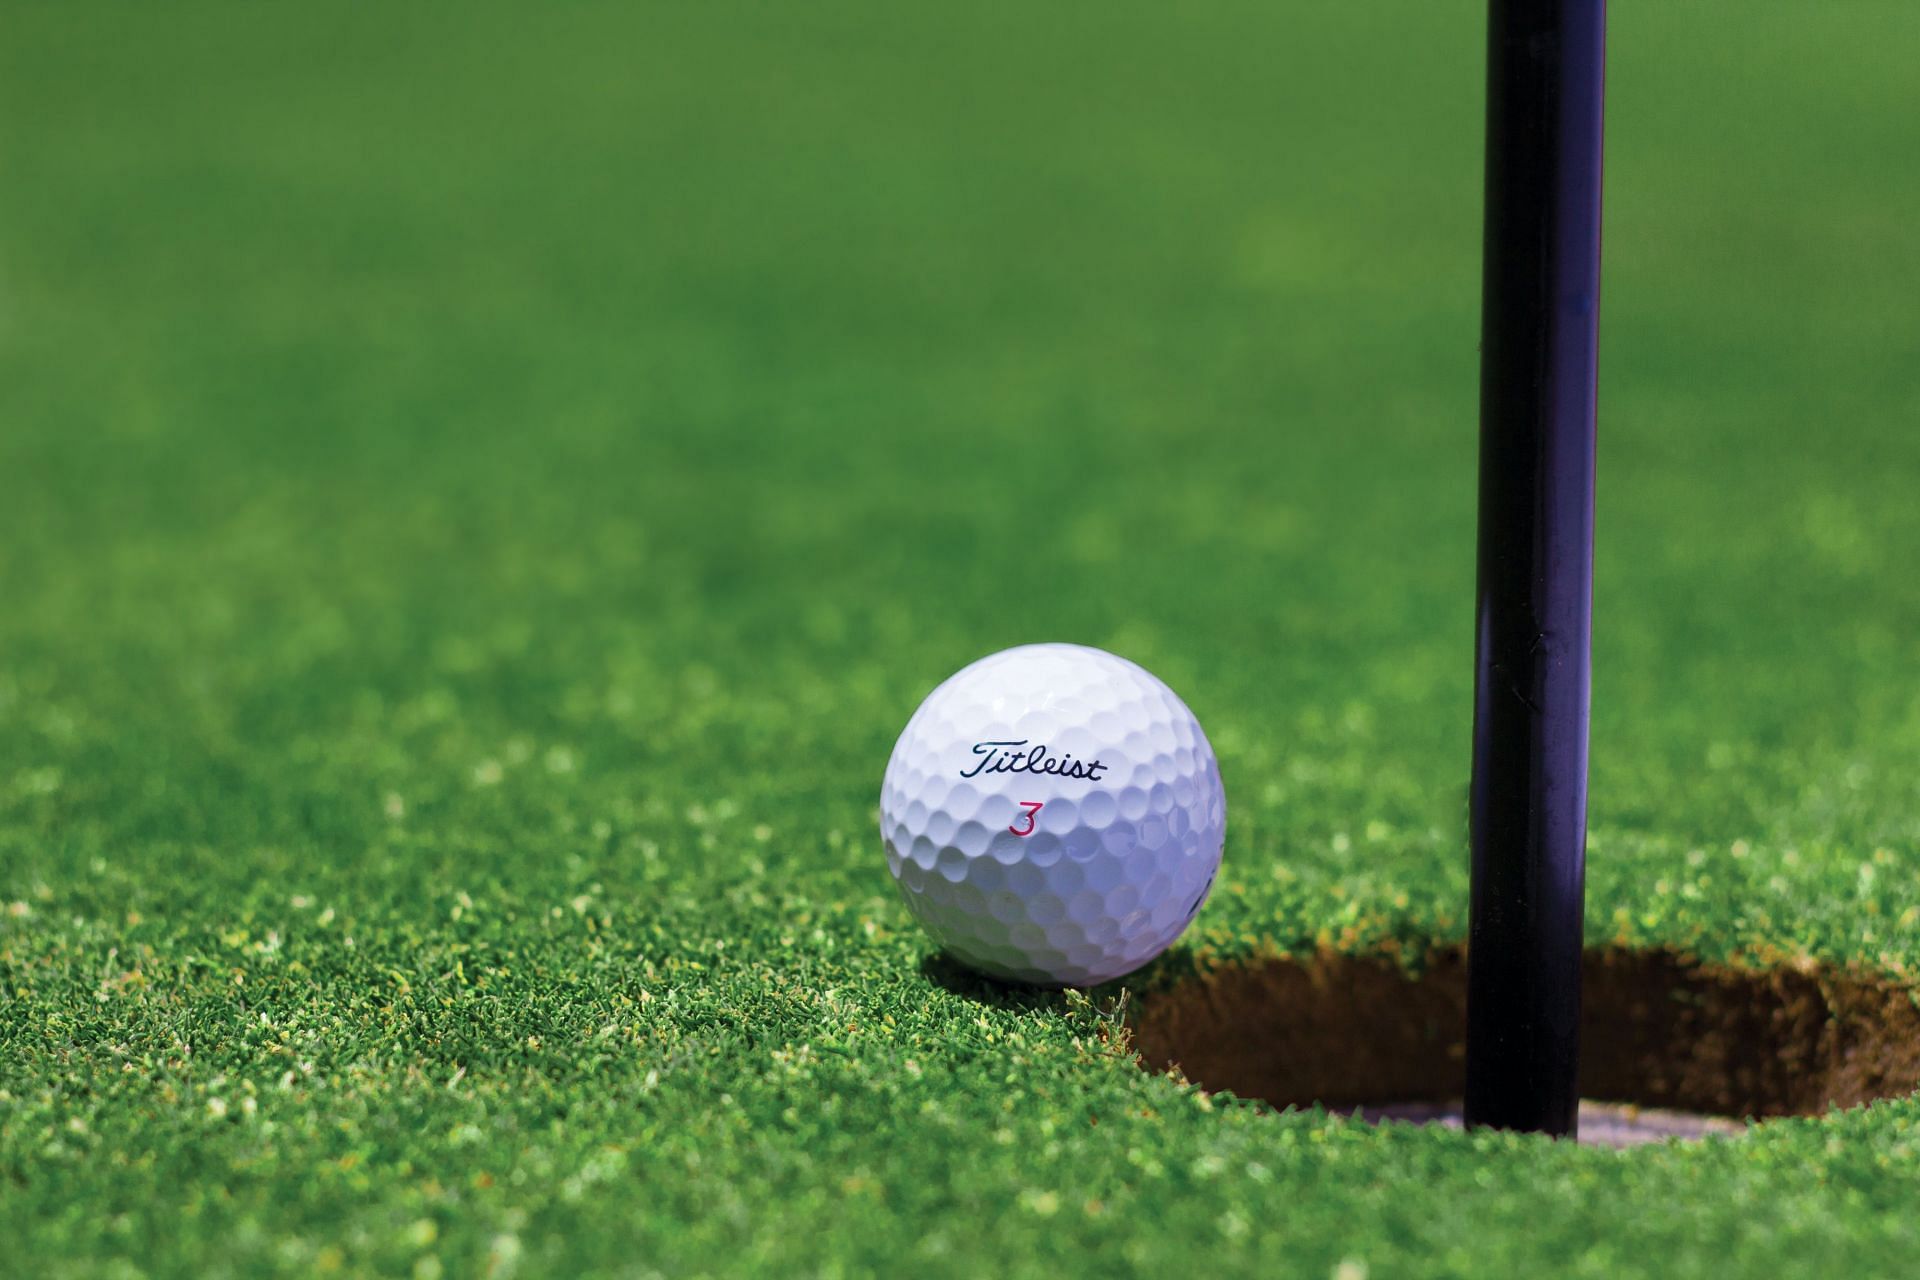 San Ramon police arrested a person on a golf course in a fraud case last month